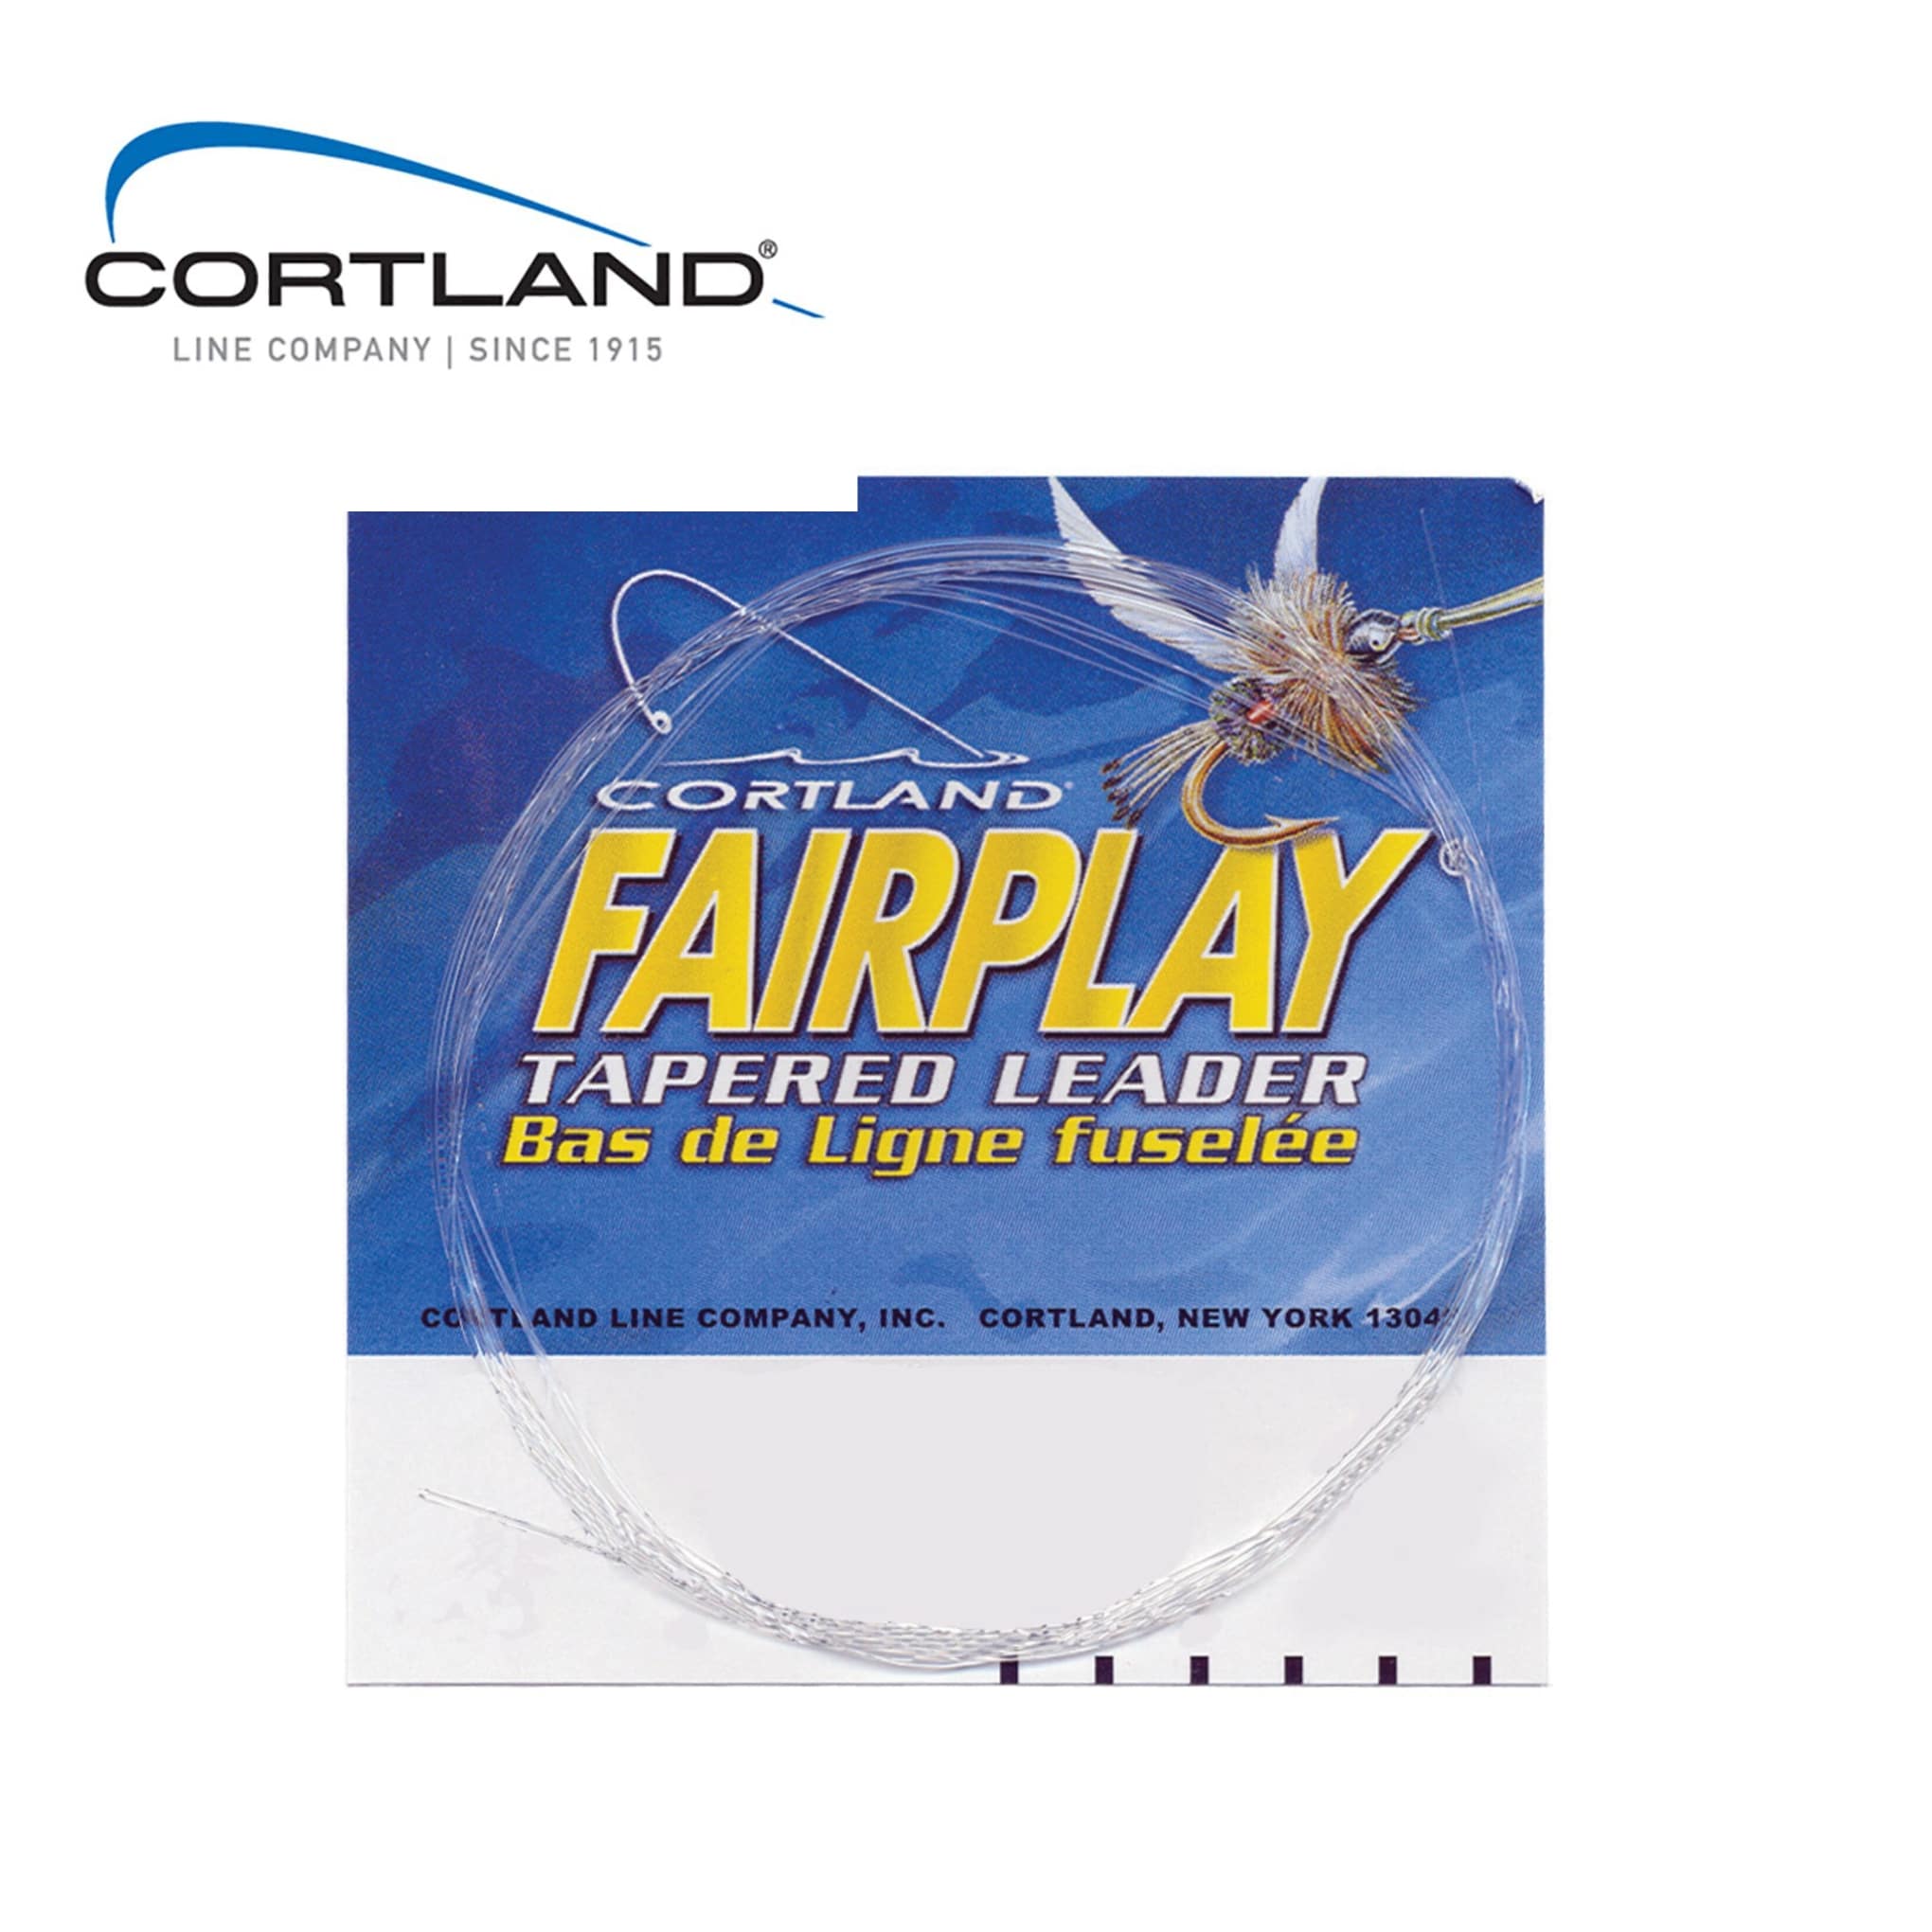 Cortland Fairplay Tapered Leader 7.5/9 ft Fly Fishing Salmon Trout